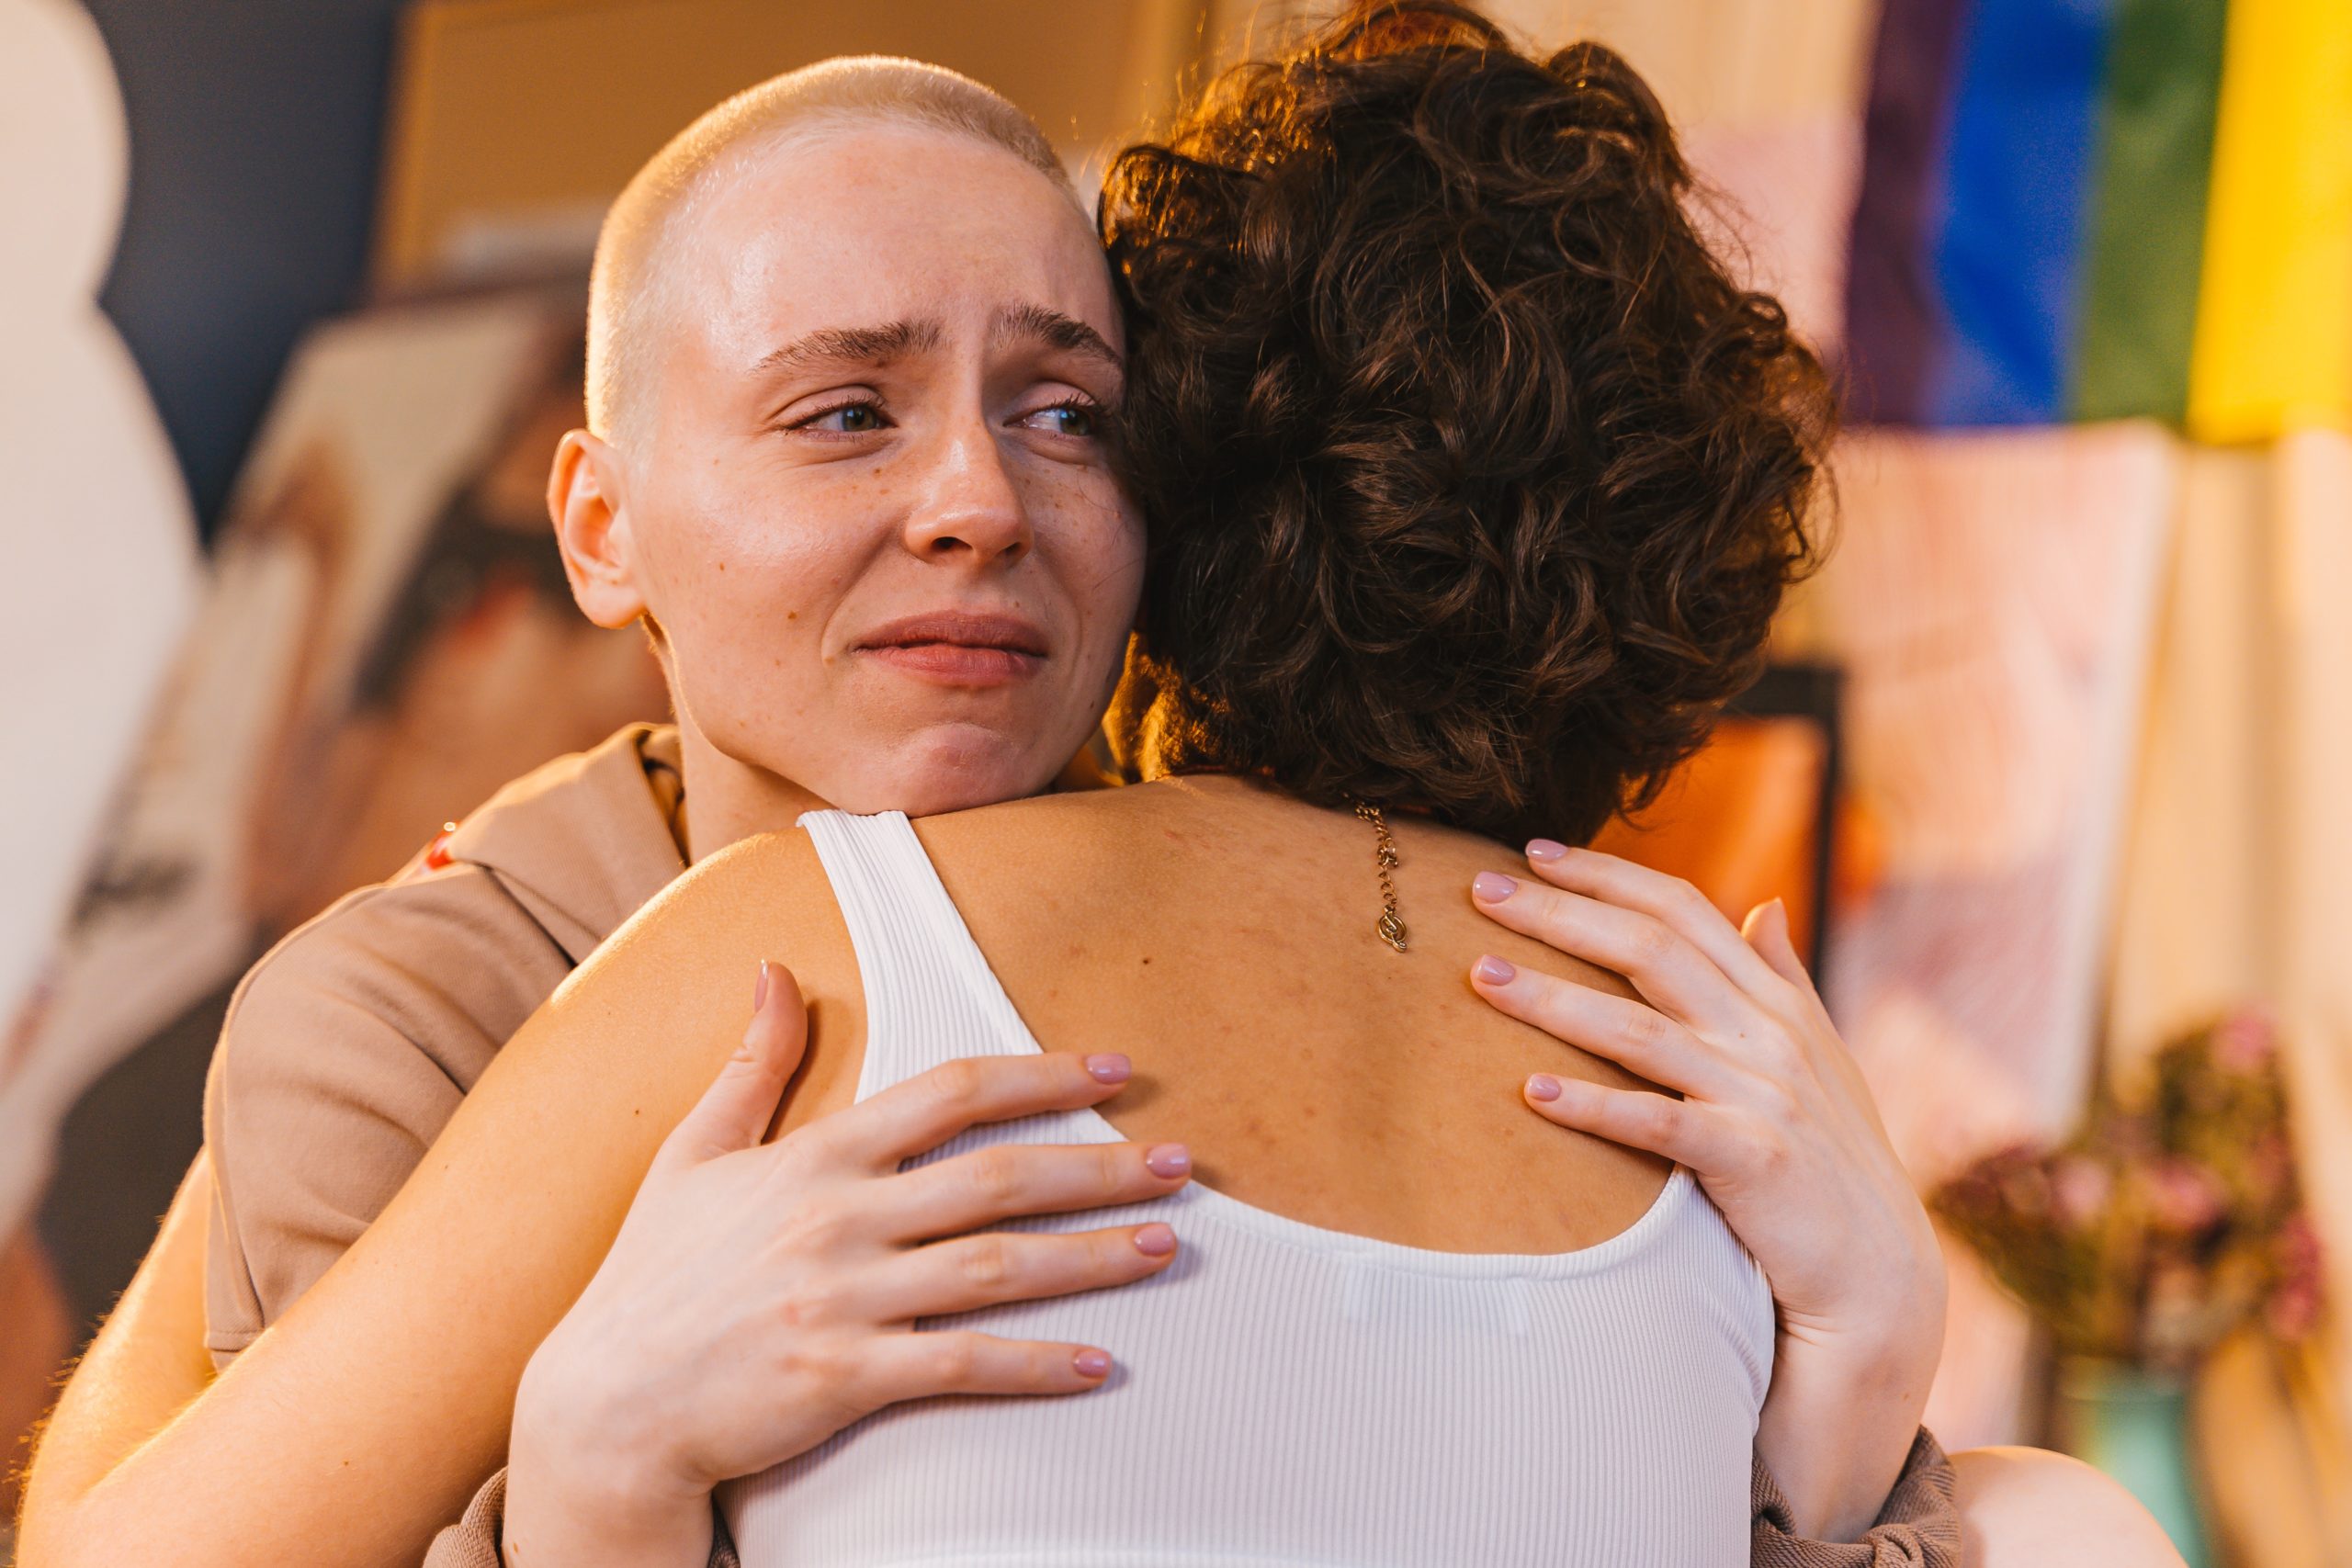 two women hugging with one woman looking upset. upset woman looks like on the verge of tears, has a buzz cut, other womens back is front facing